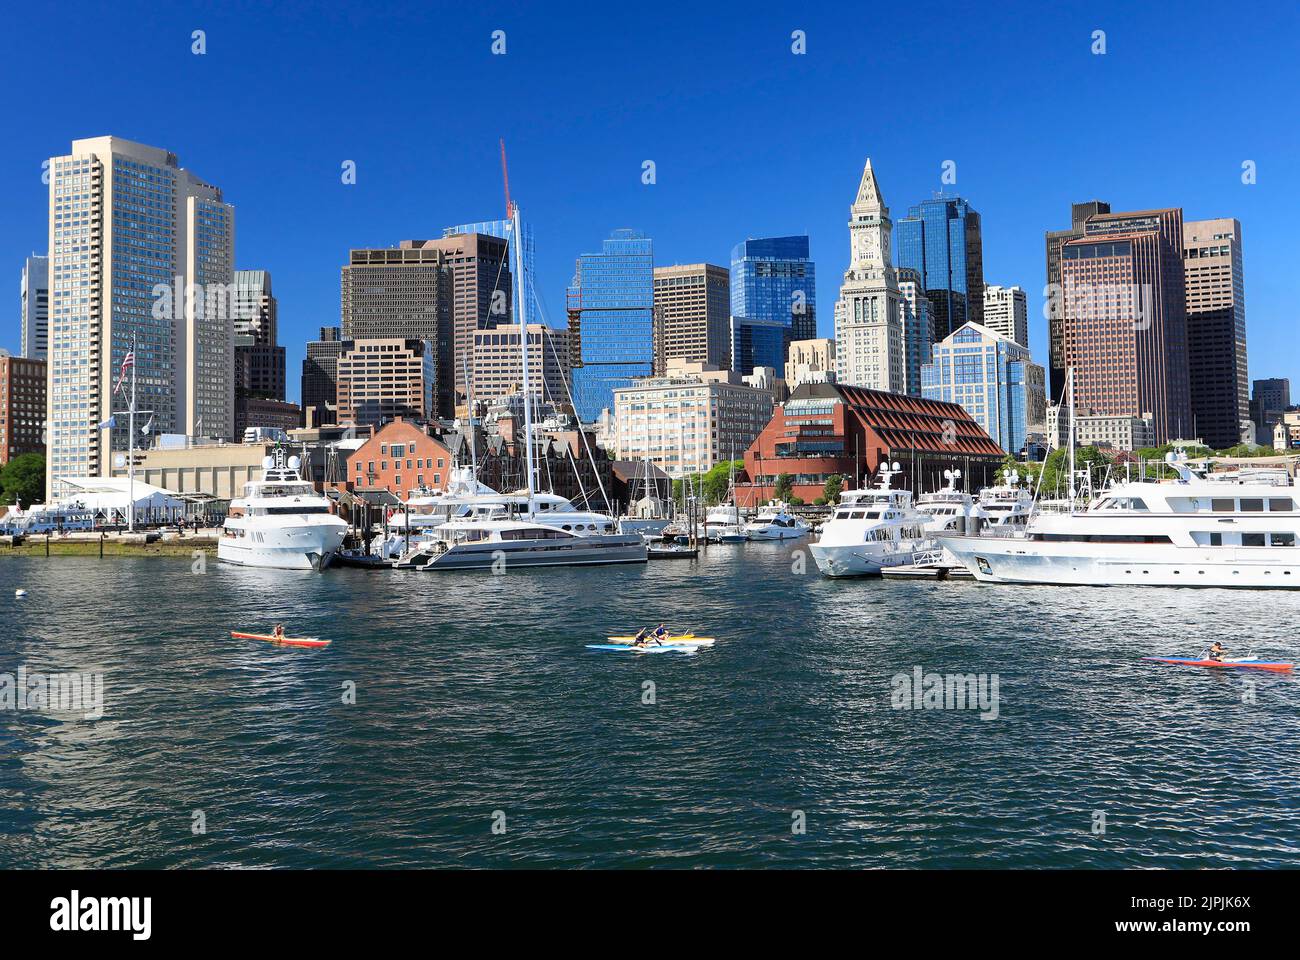 Boston skyline and harbor with boats, kayaks and Atlantic Ocean on the foreground, USA Stock Photo